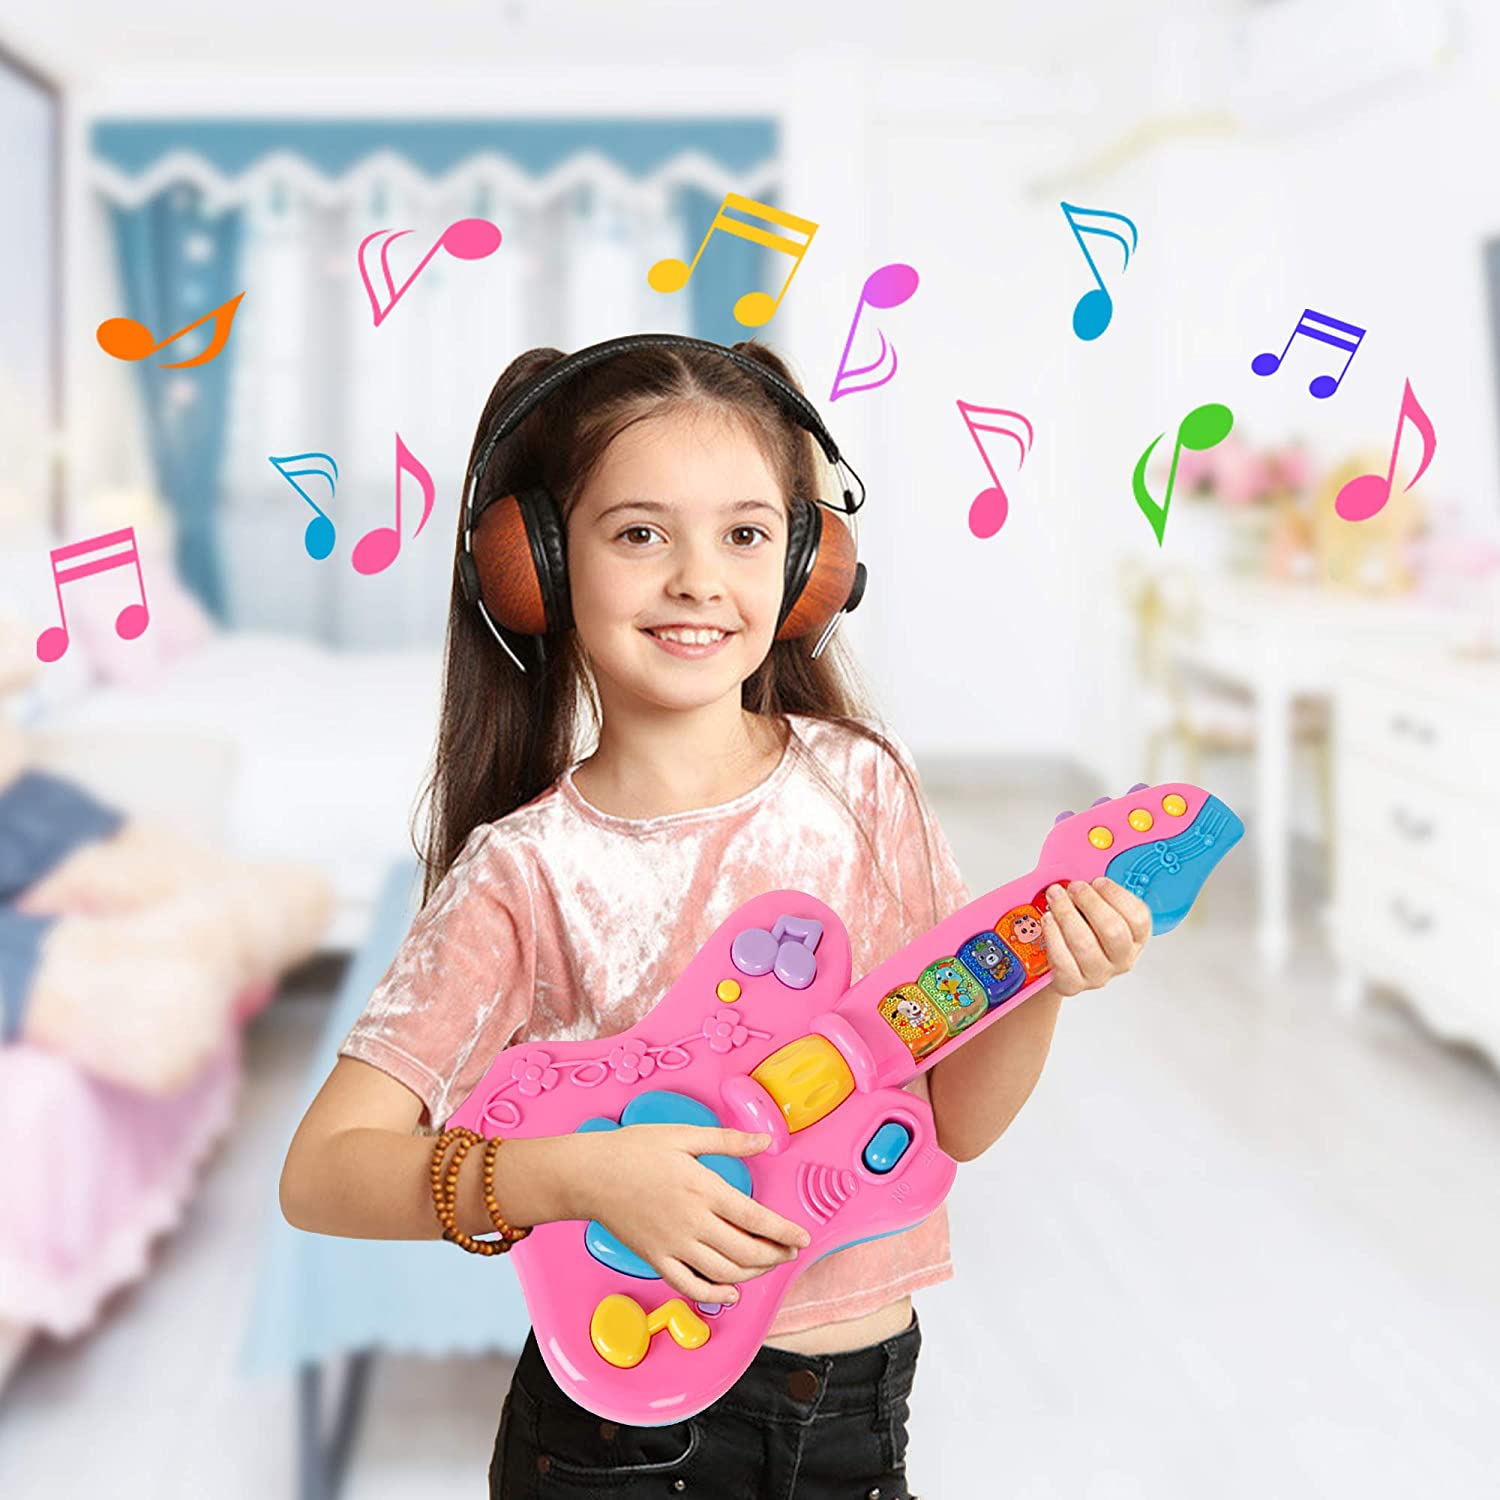 Guitar Toys for Toddler - Musical Instruments with Light and Music - Kids Preschool Early Education Play Toy for Boys Girls - Ages 12 Months and Up